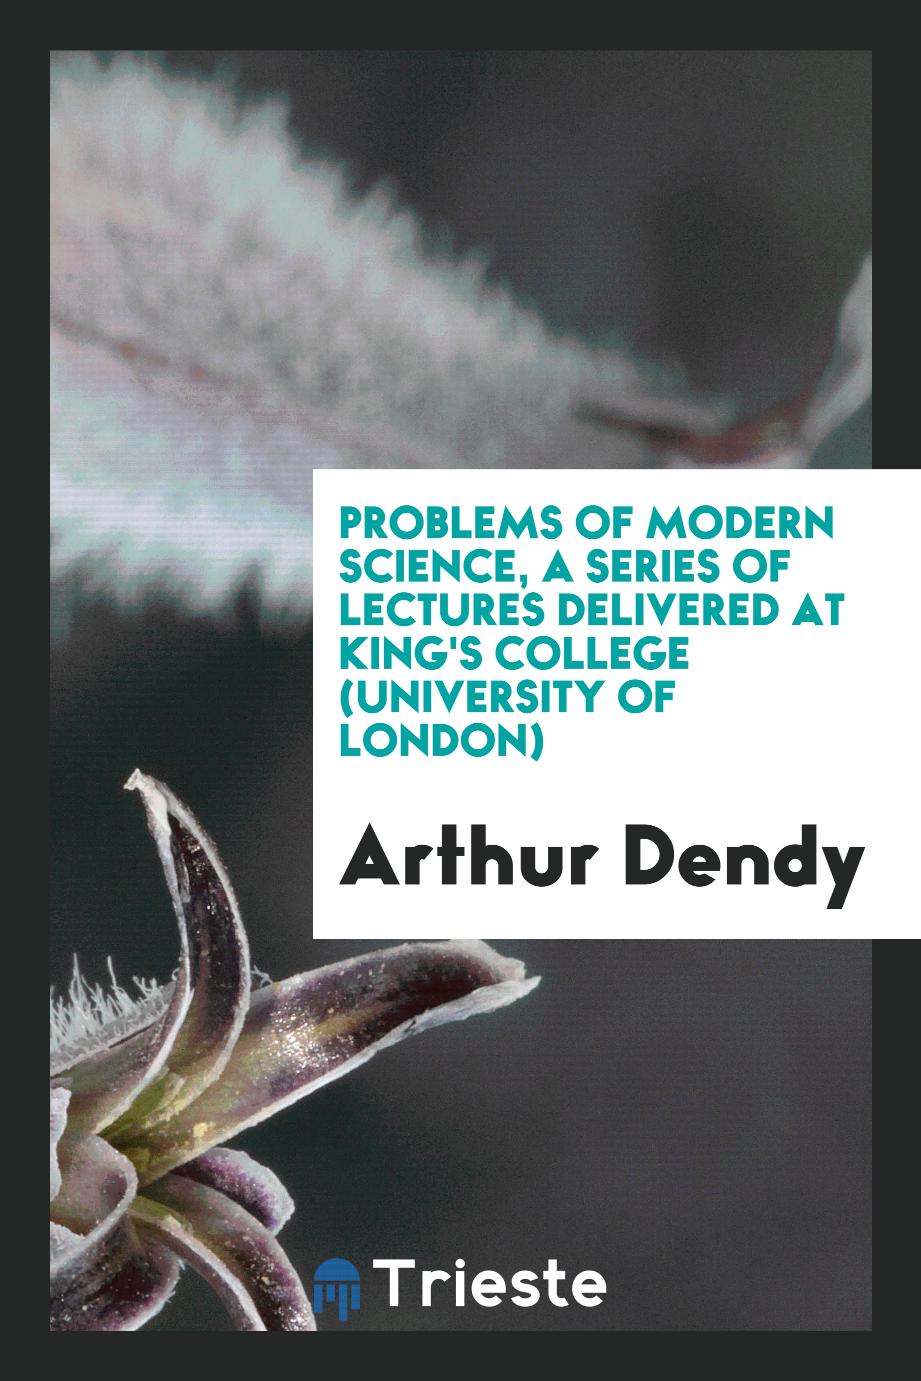 Problems of modern science, a series of lectures delivered at King's College (University of London)